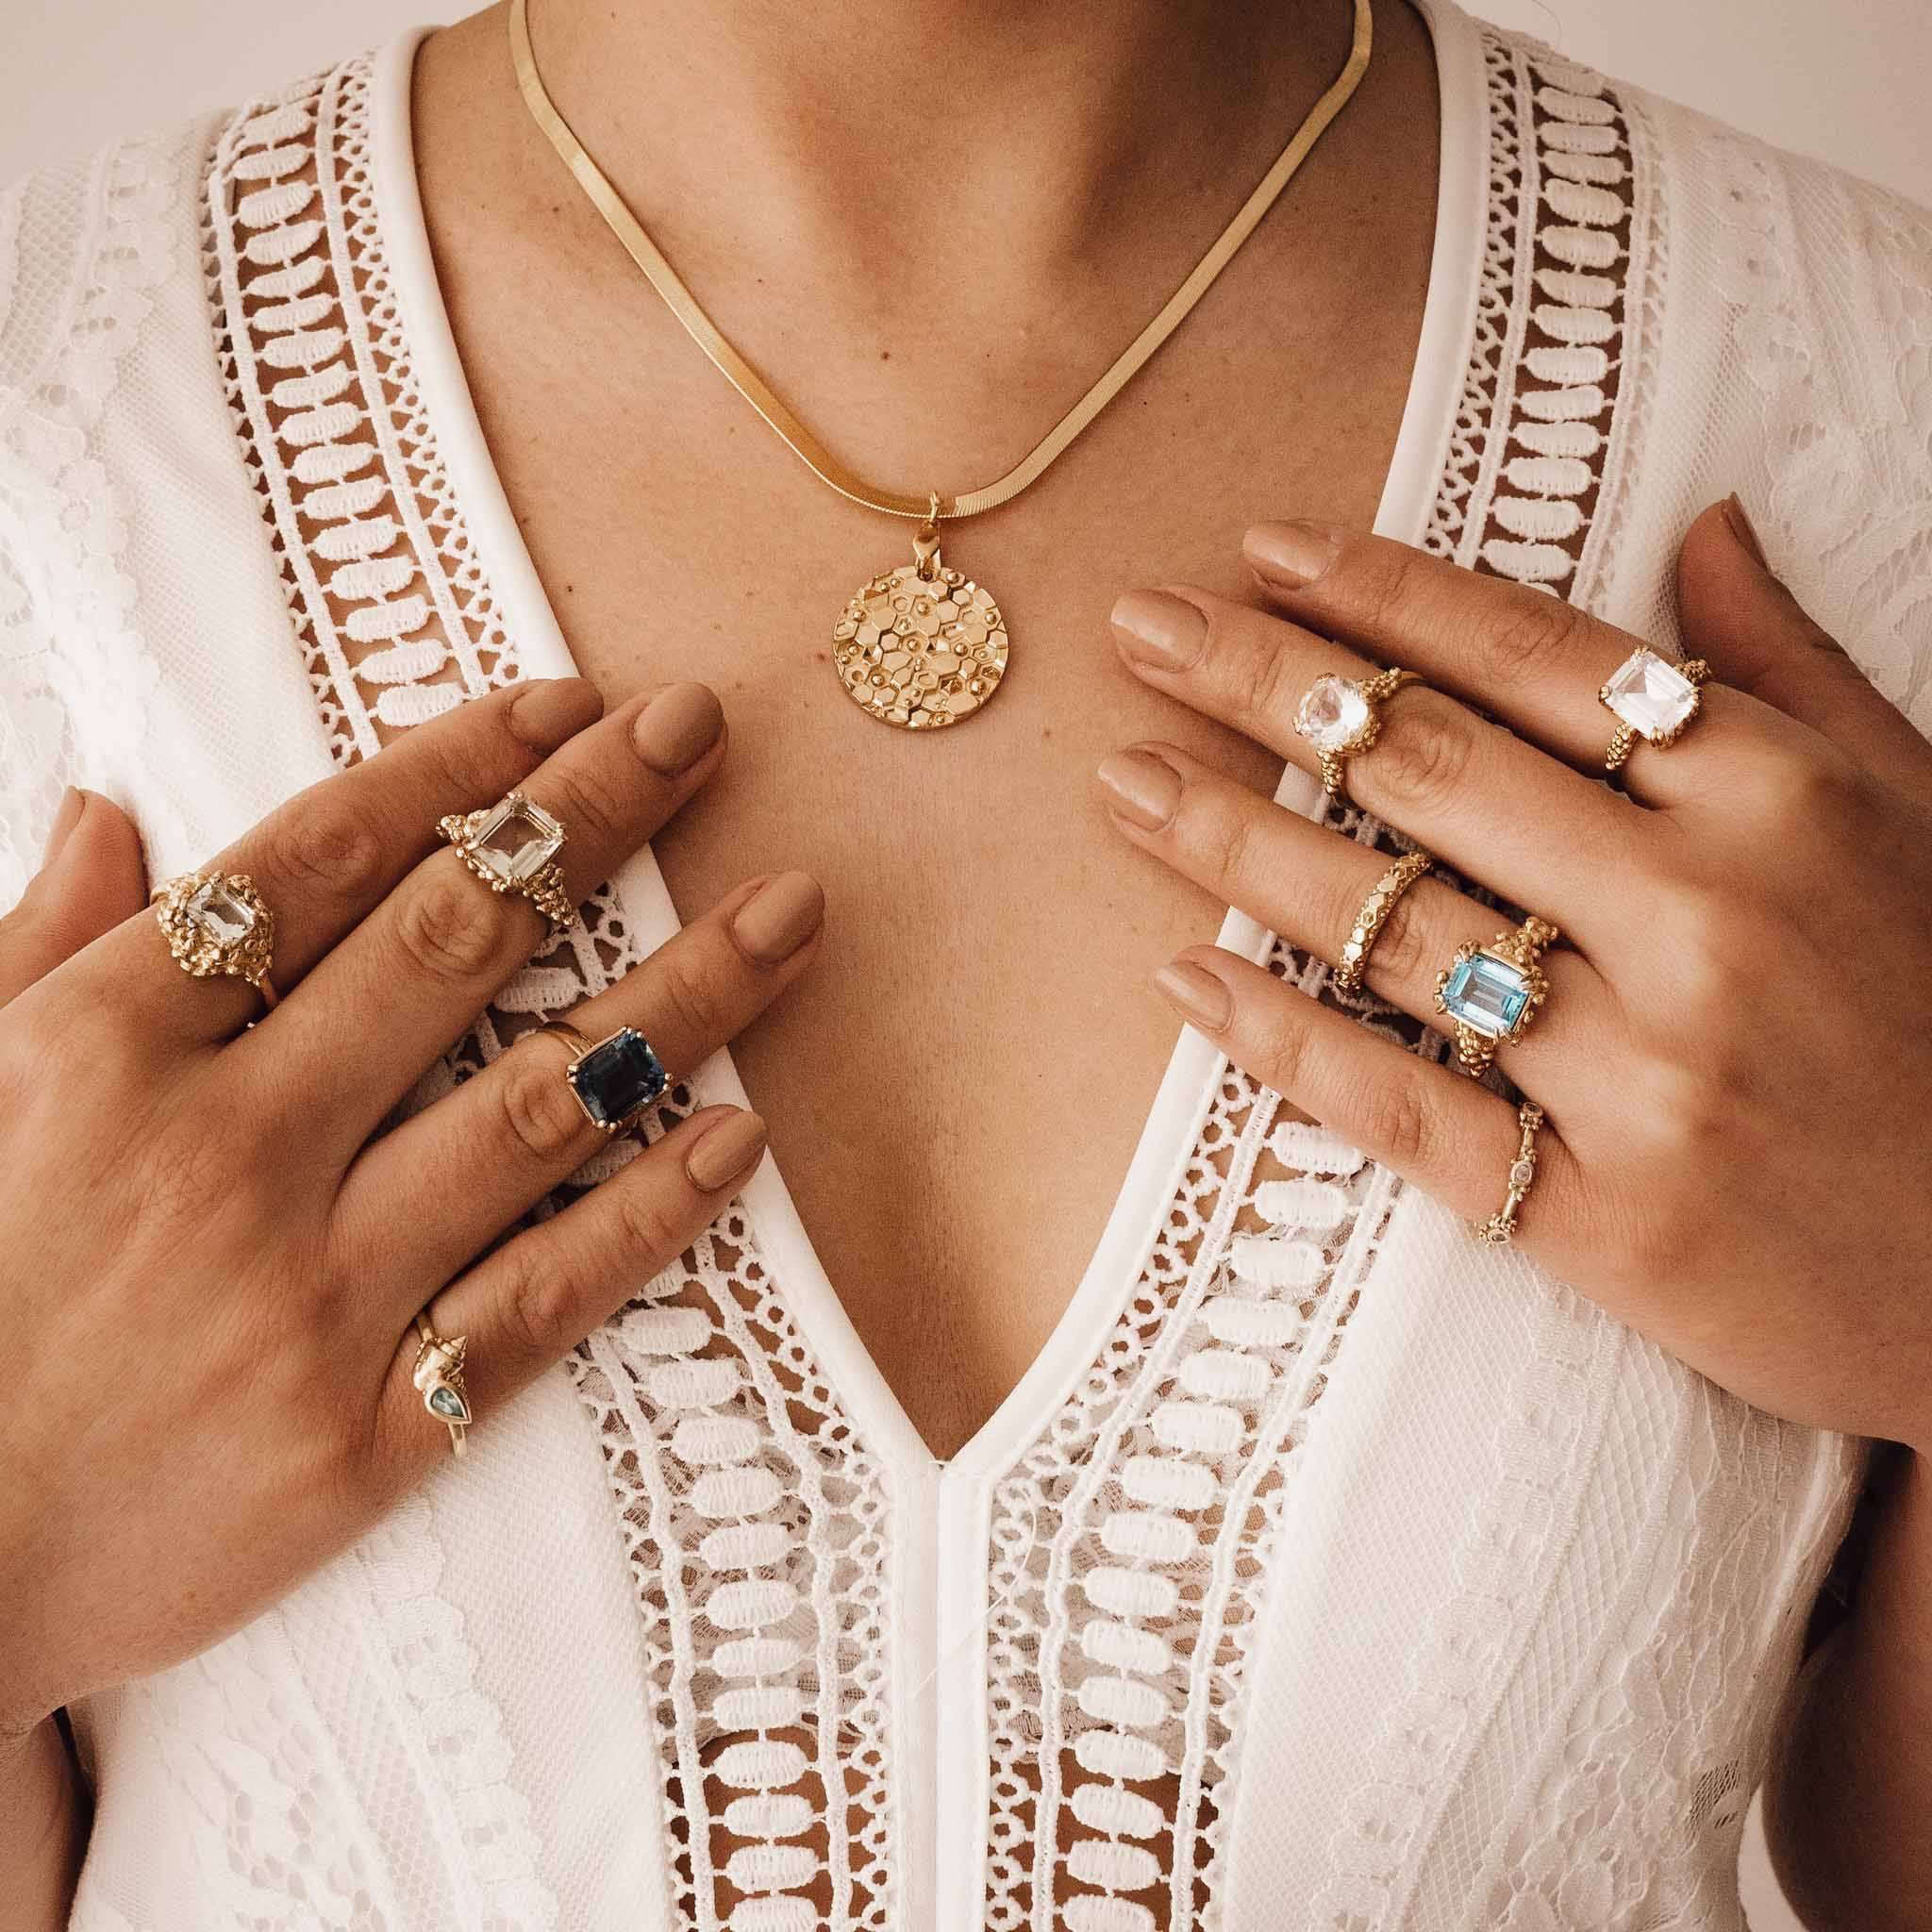 The dos and don’ts of wearing gemstone jewellery - Dainty London